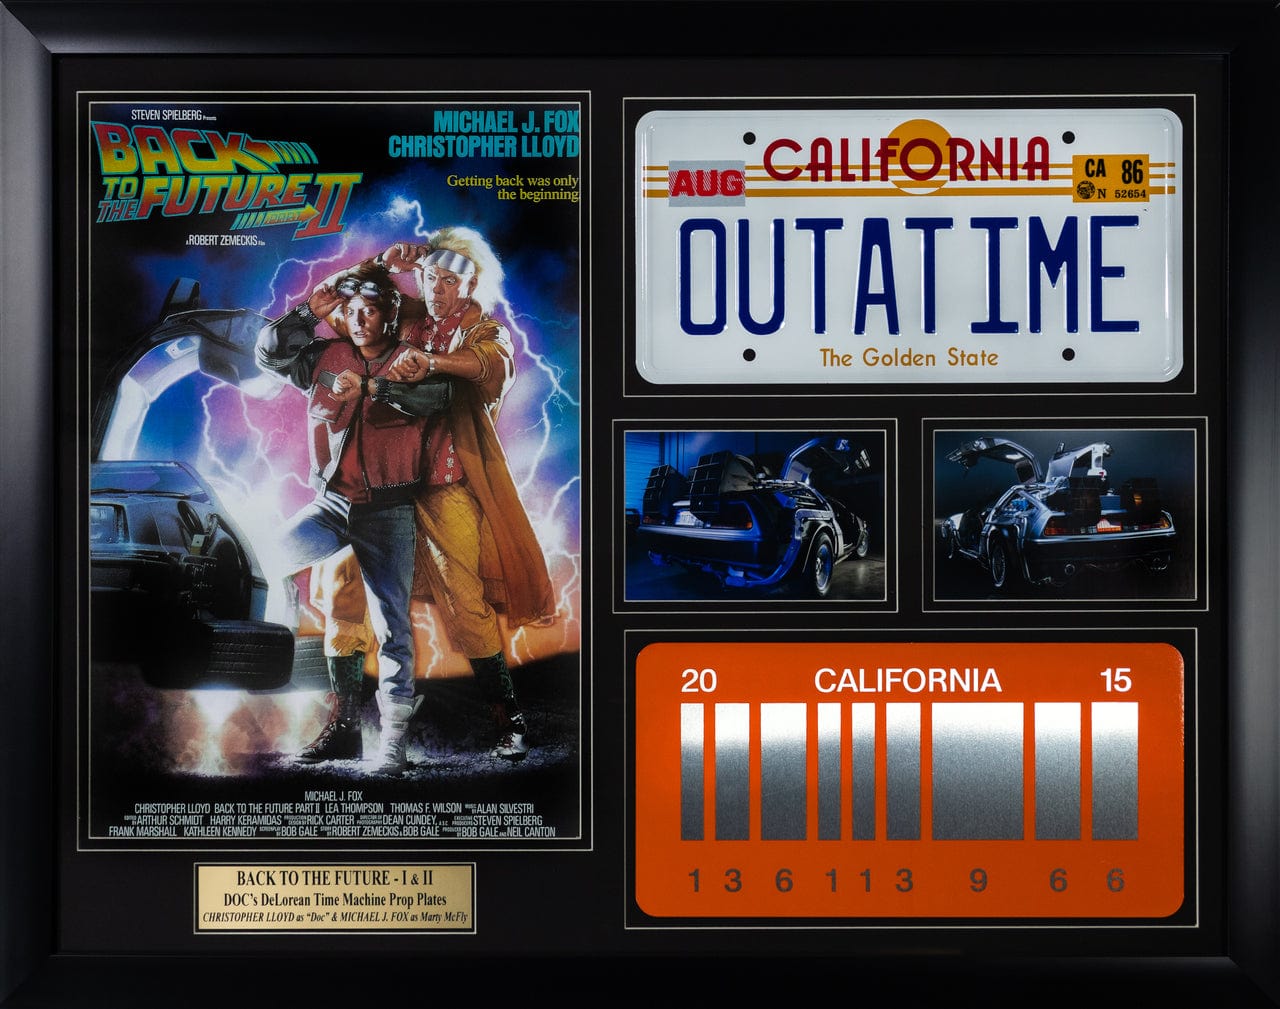 Back to the Future Part II Collectible (1)